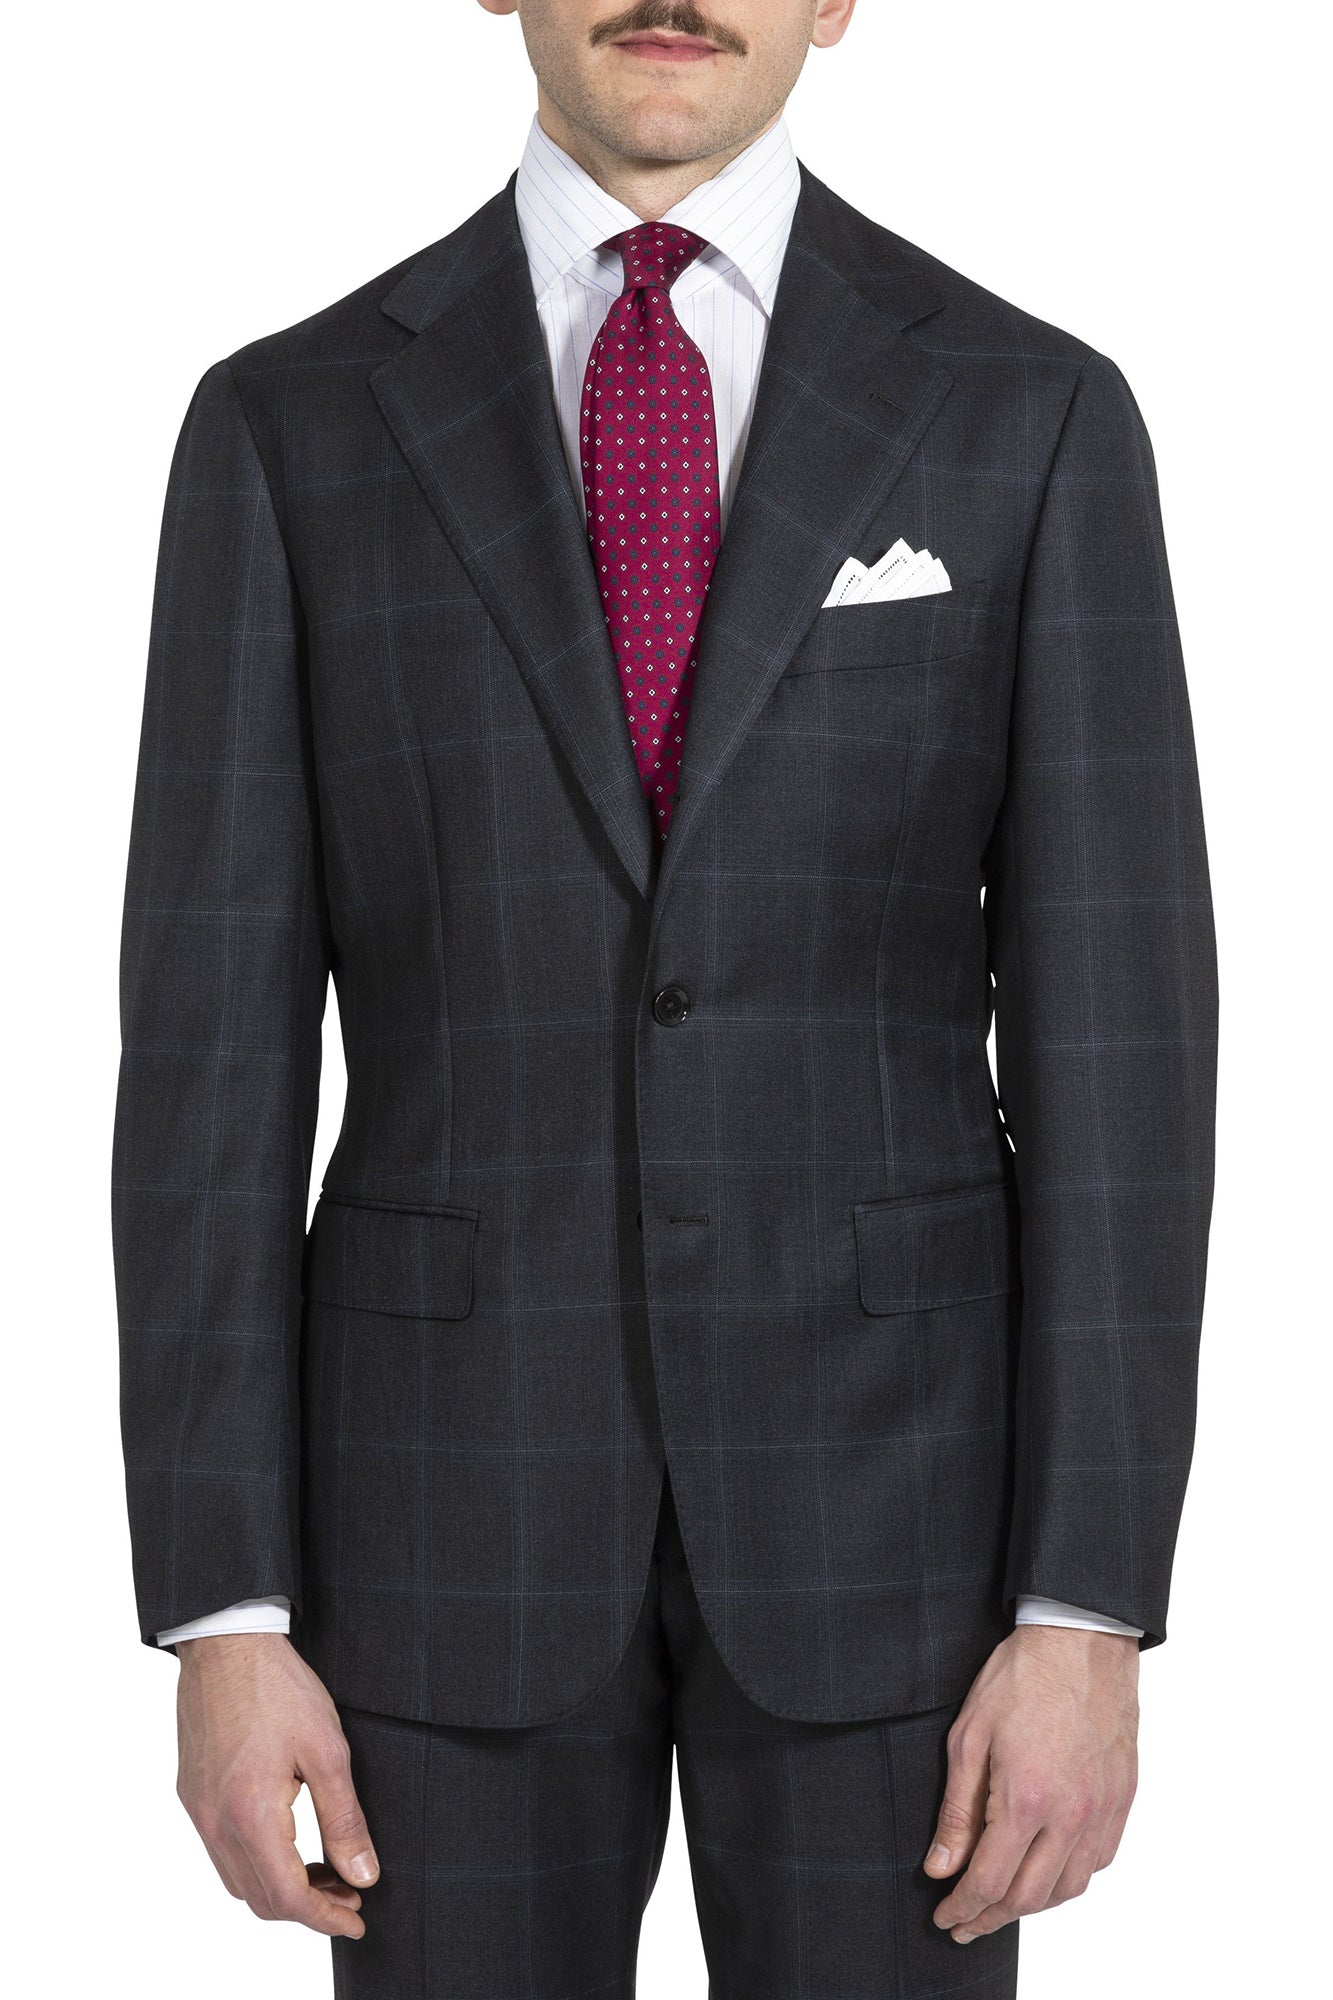 The Armoury by Ring Jacket Model 3A Charcoal/Blue Worsted Wool Windowpane Suit